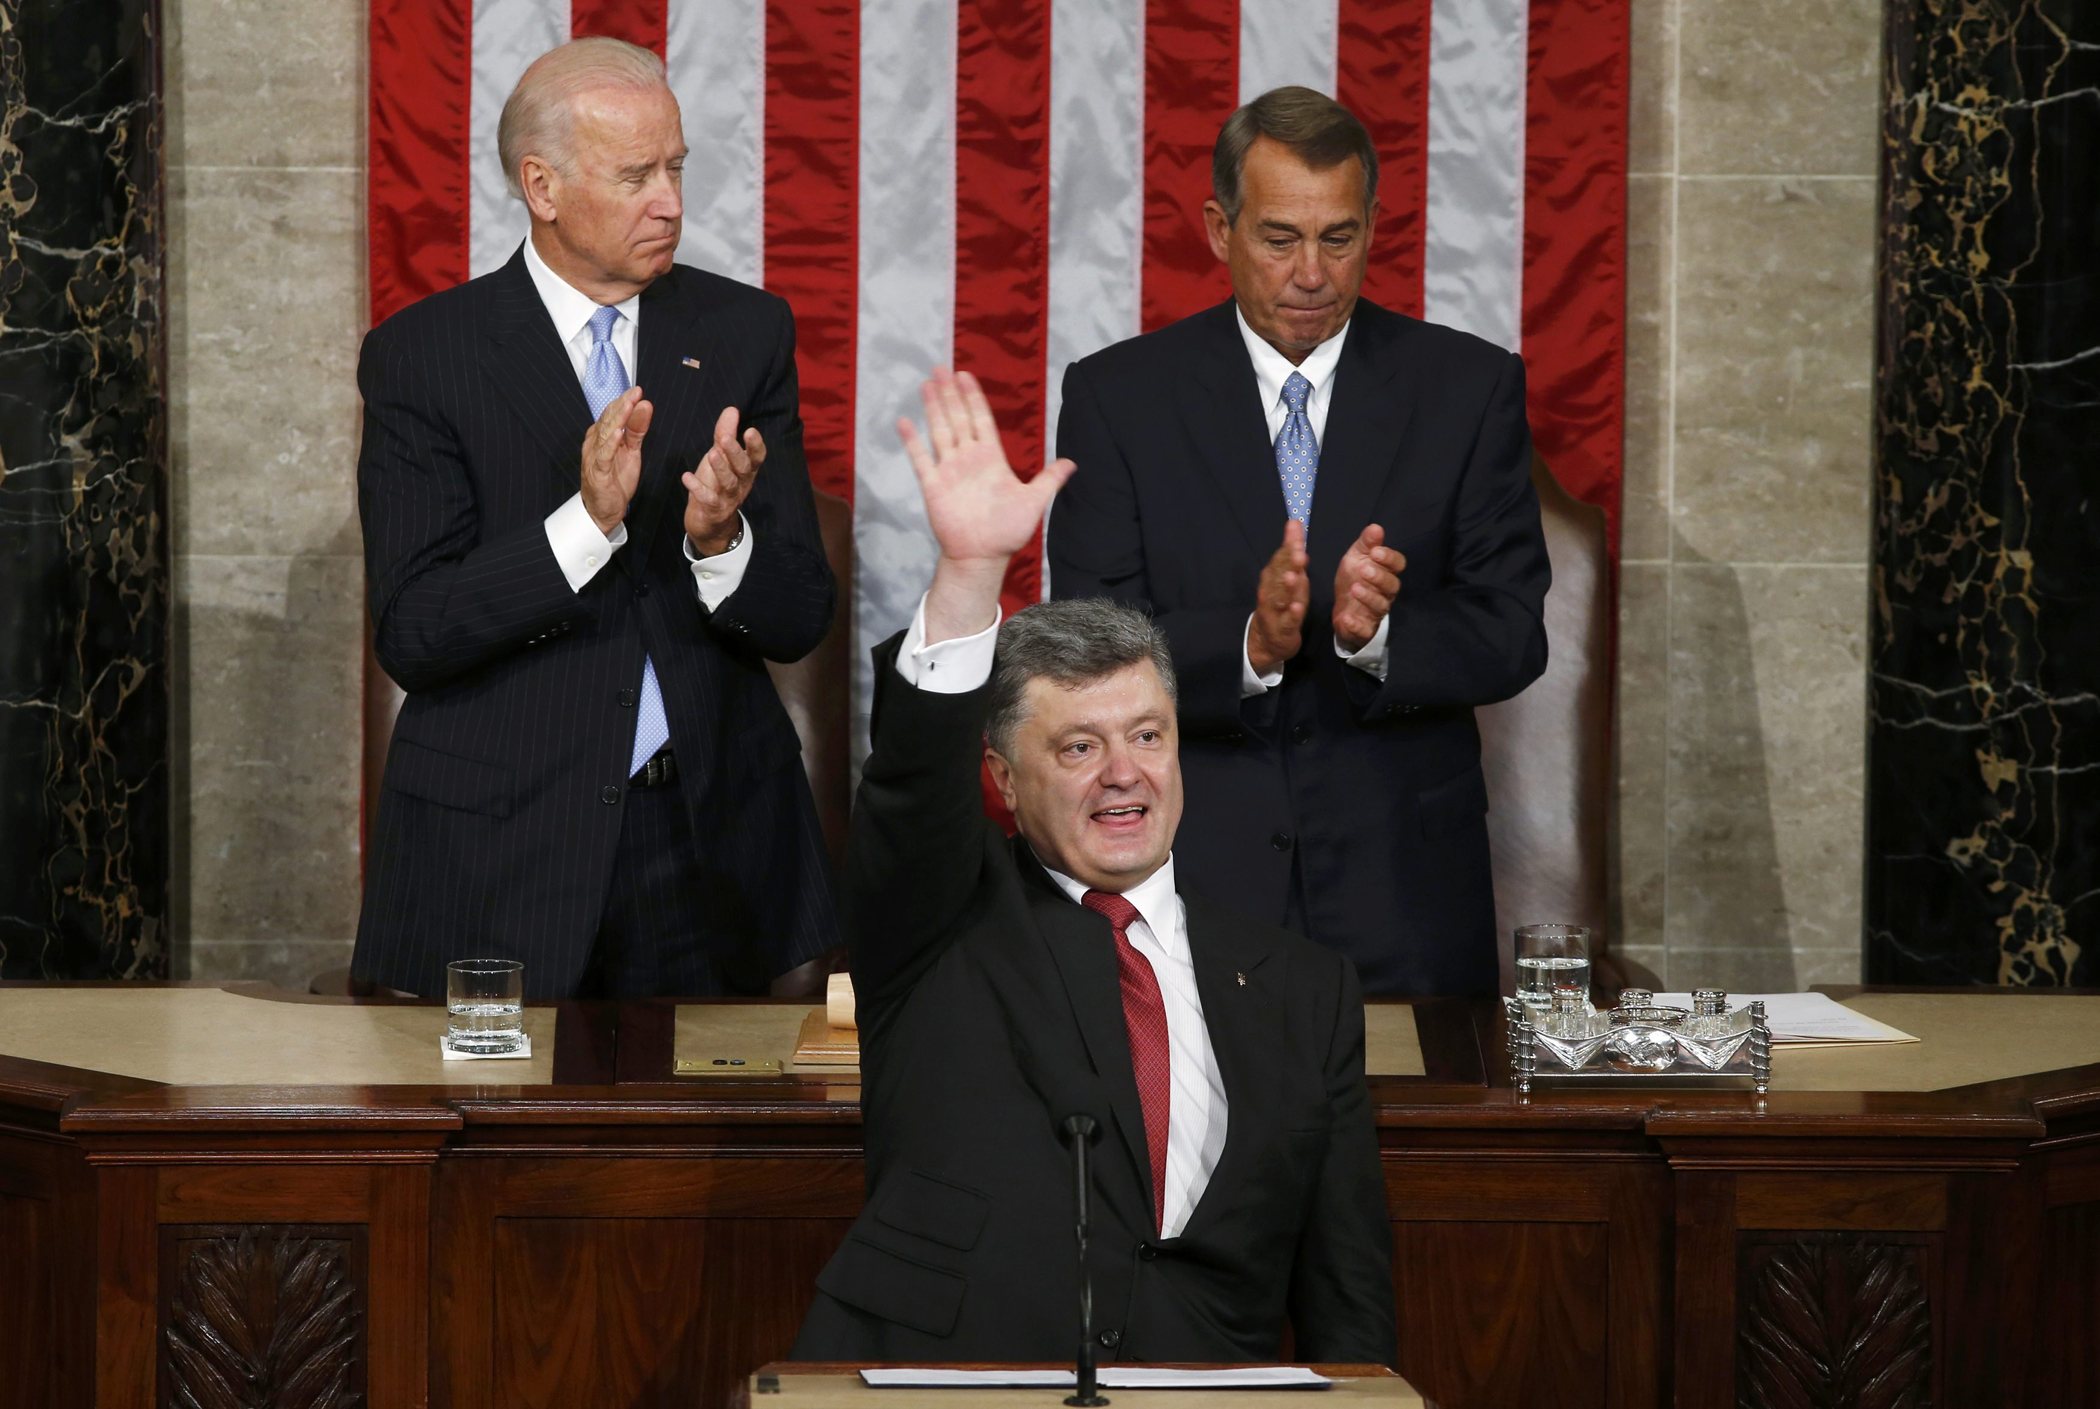 Ukraine President Petro Poroshenko acknowledges applause after addressing a joint meeting of Congress in the U.S. Capitol in Washington, Sept. 18, 2014. (Kevin Lamarque—Reuters)